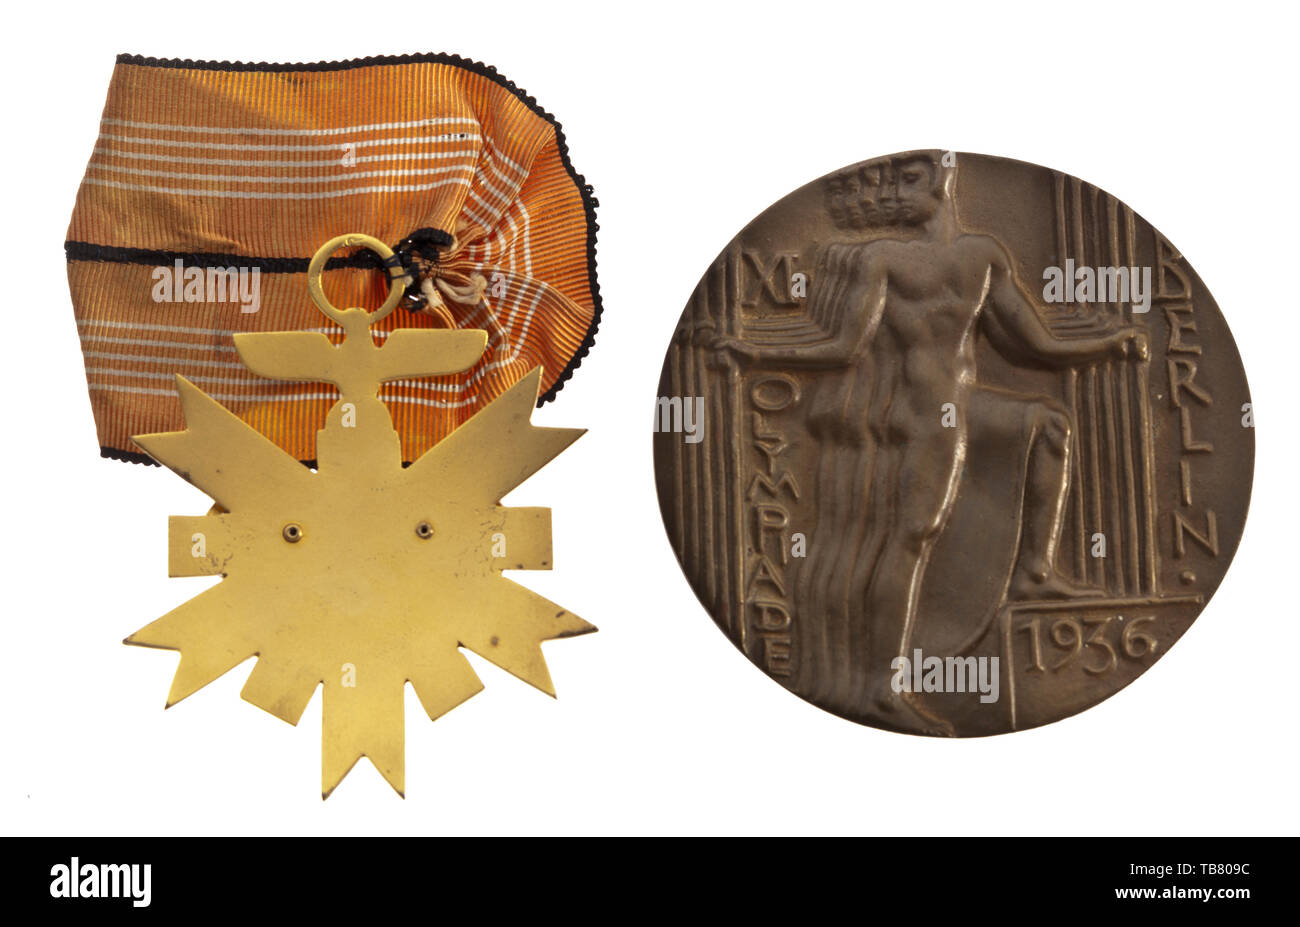 Four objects commemorating the Olympic Games 1936, A German Olympic Decoration, 2nd Class, on ribbon. Includes a relief plaque in bronze by Otto Placzek, inscribed 'XI. Olympiade Berlin 1936' on the front, the Olympic bell and the artist's signature on the back, in a red leather, gold-embossed presentation case (diameter circa 7.5 cm). Comes with a stand (black plastic) with inlaid bronze medal, inscribed 'Zur Ehre des Vaterlandes / zum Ruhme des Sports' (tr. For the honour of our country and for the glory of sport) on the front, the Olympic bell on the back (total height 7, Editorial-Use-Only Stock Photo